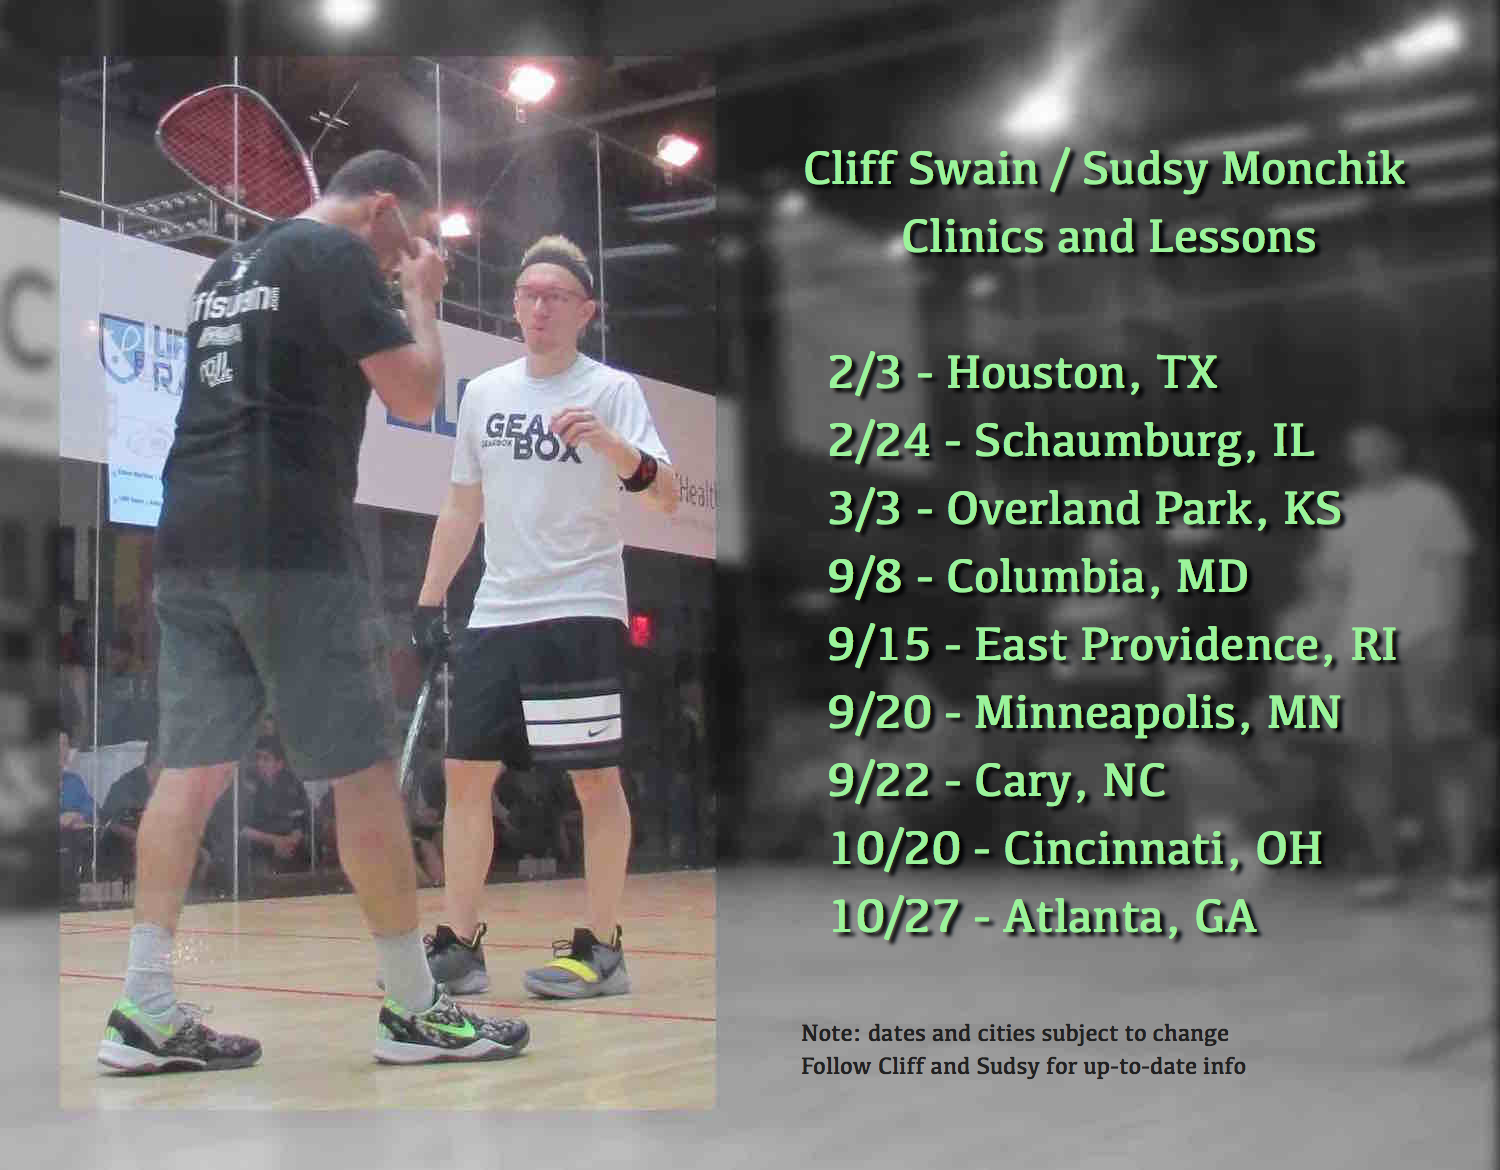 Cliff Swain and Sudsy Monchik Racquetball Clinics